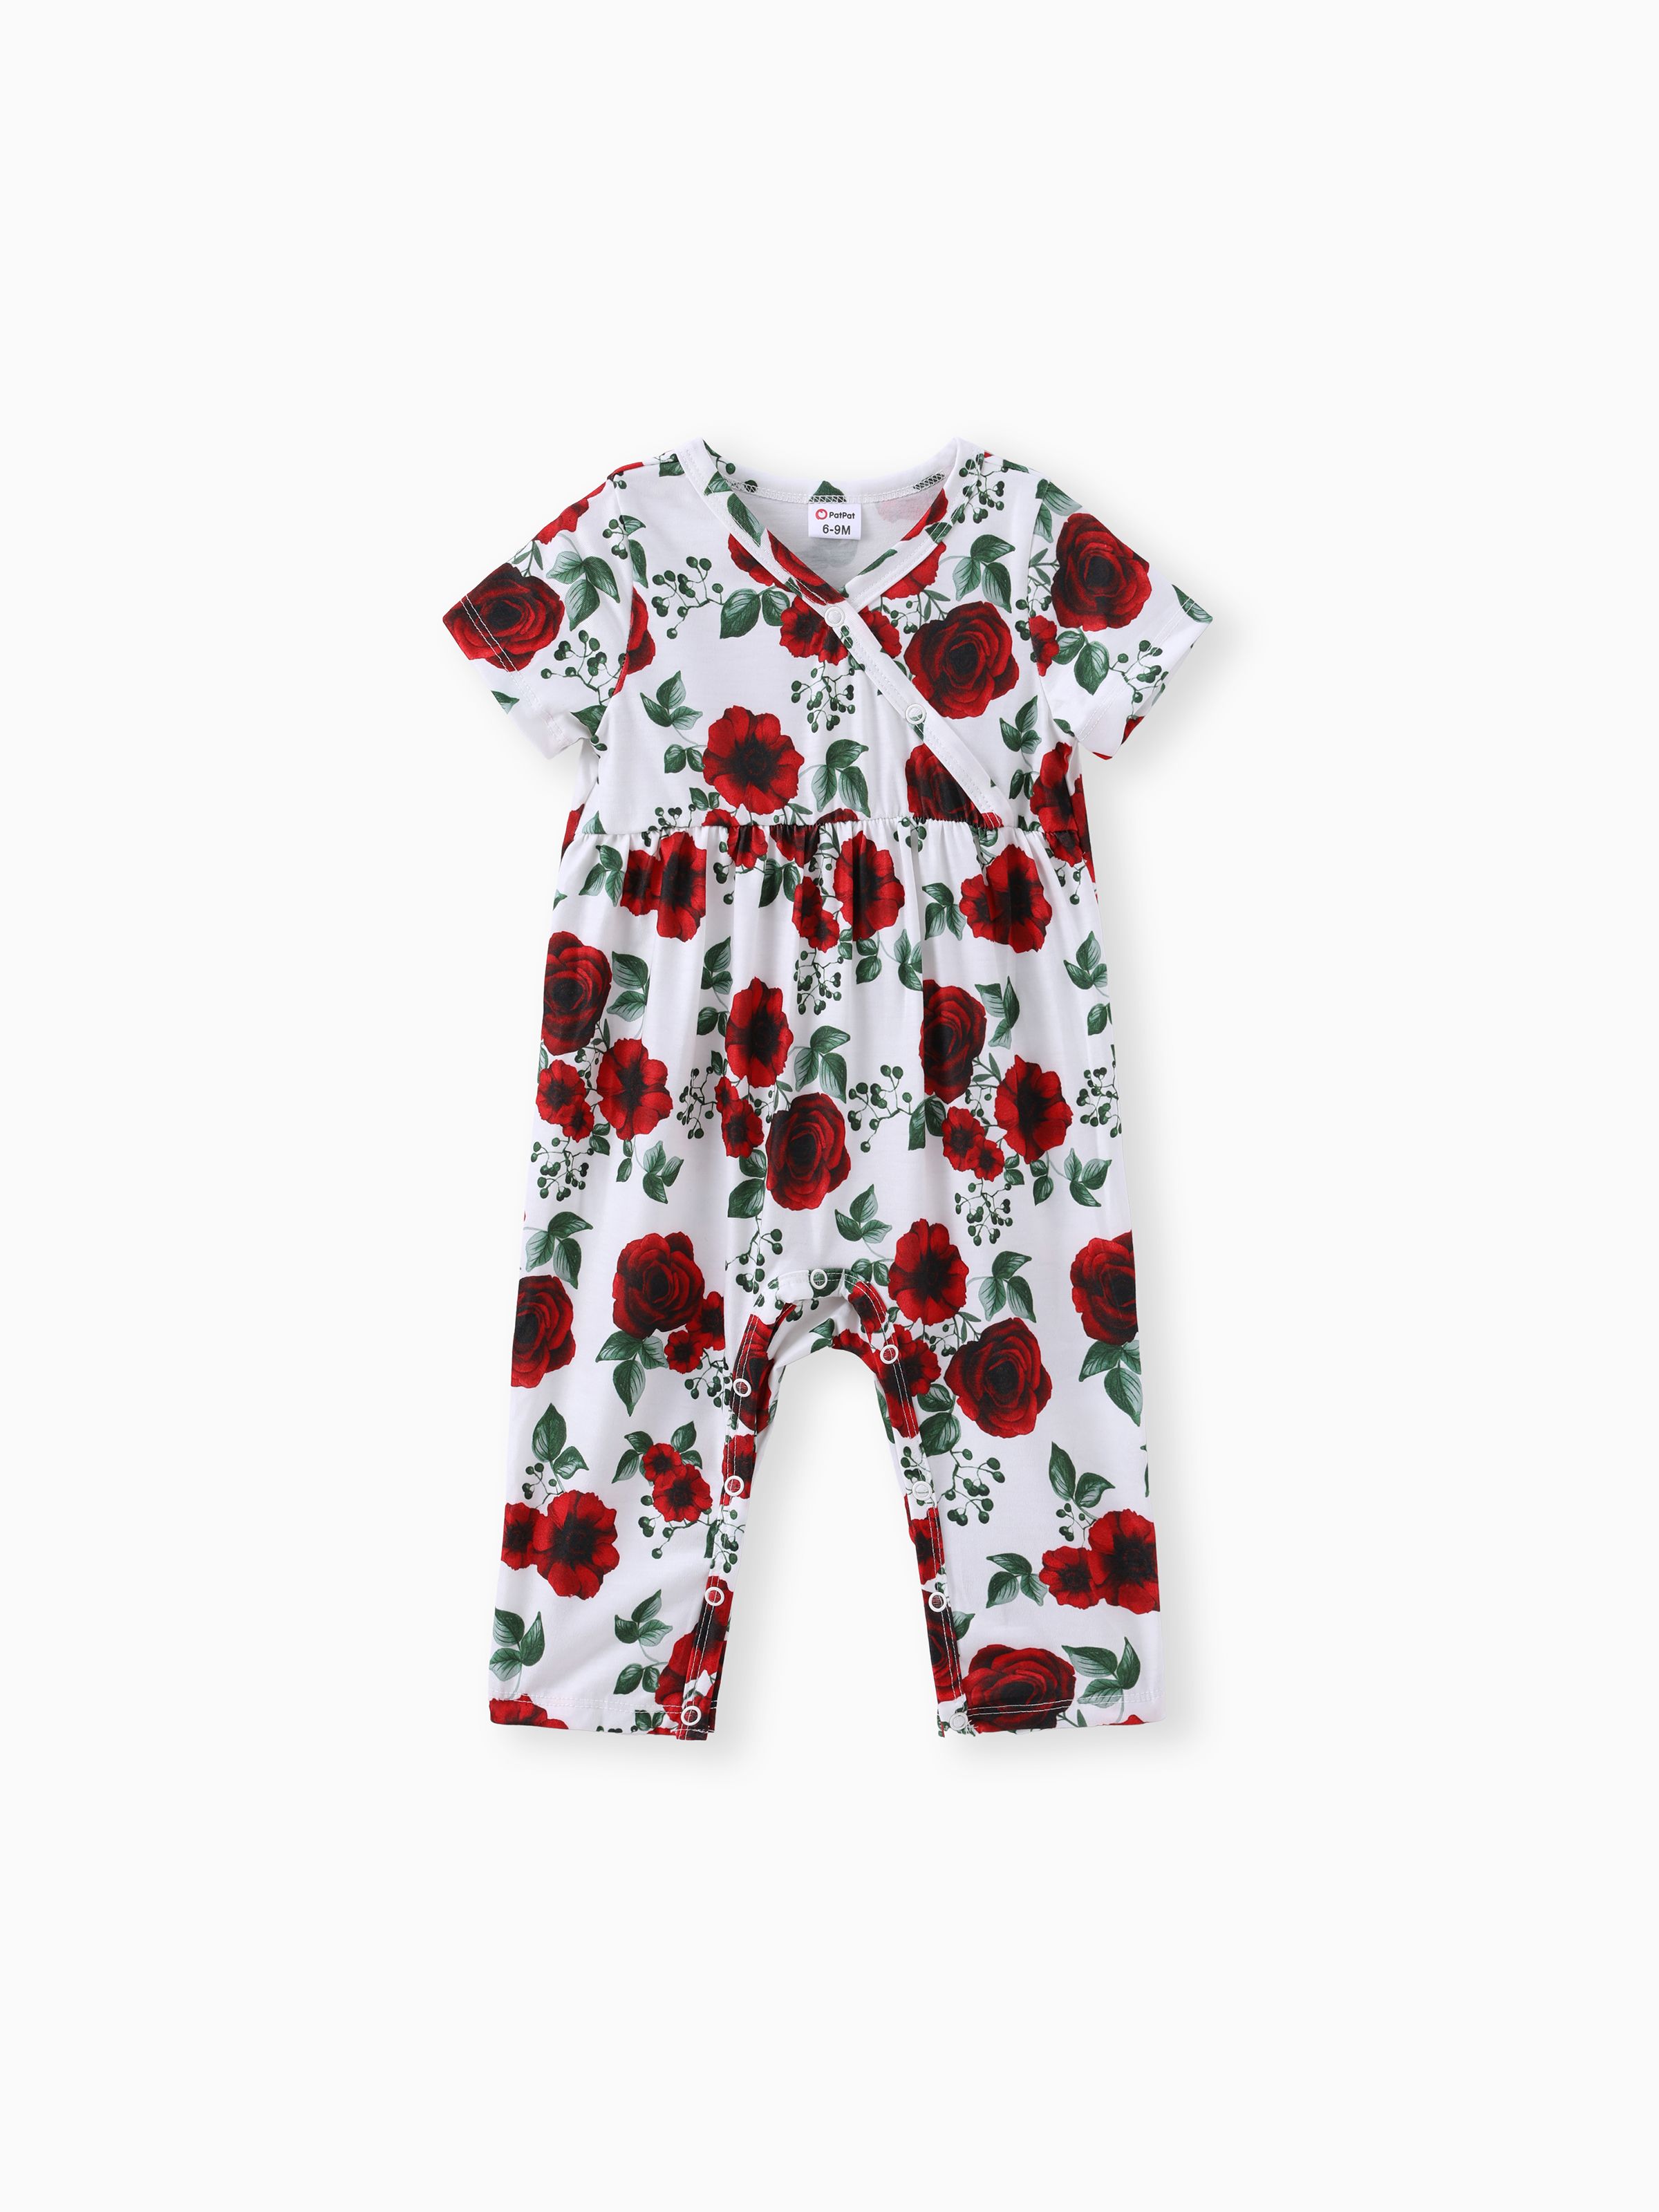 

Floral Babygirl Jumpsuit - Soft and Comfy, 1 Piece with Front Snaps